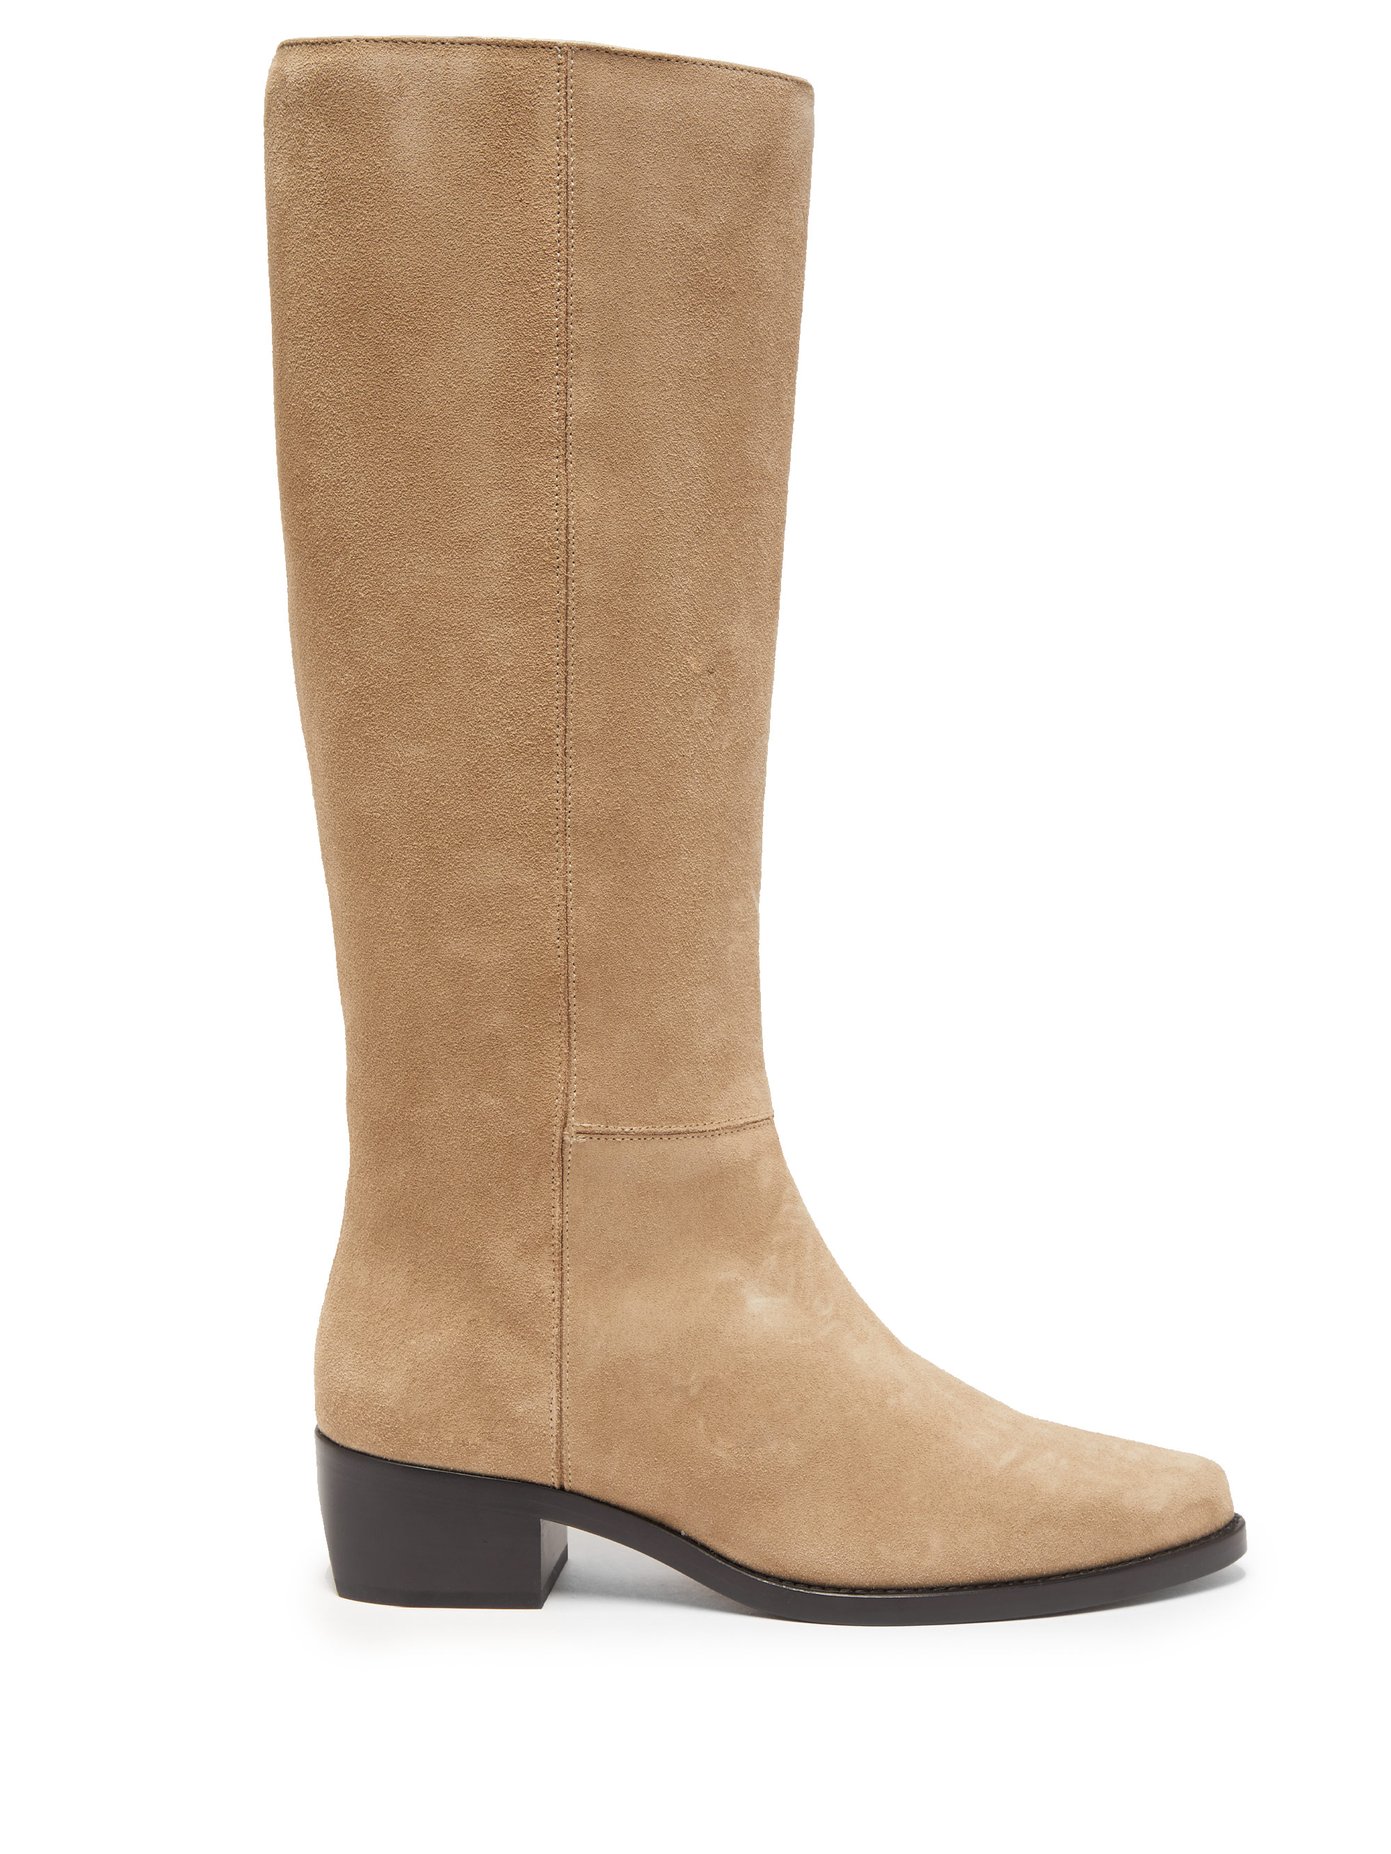 Knee-high suede riding boots | Legres 